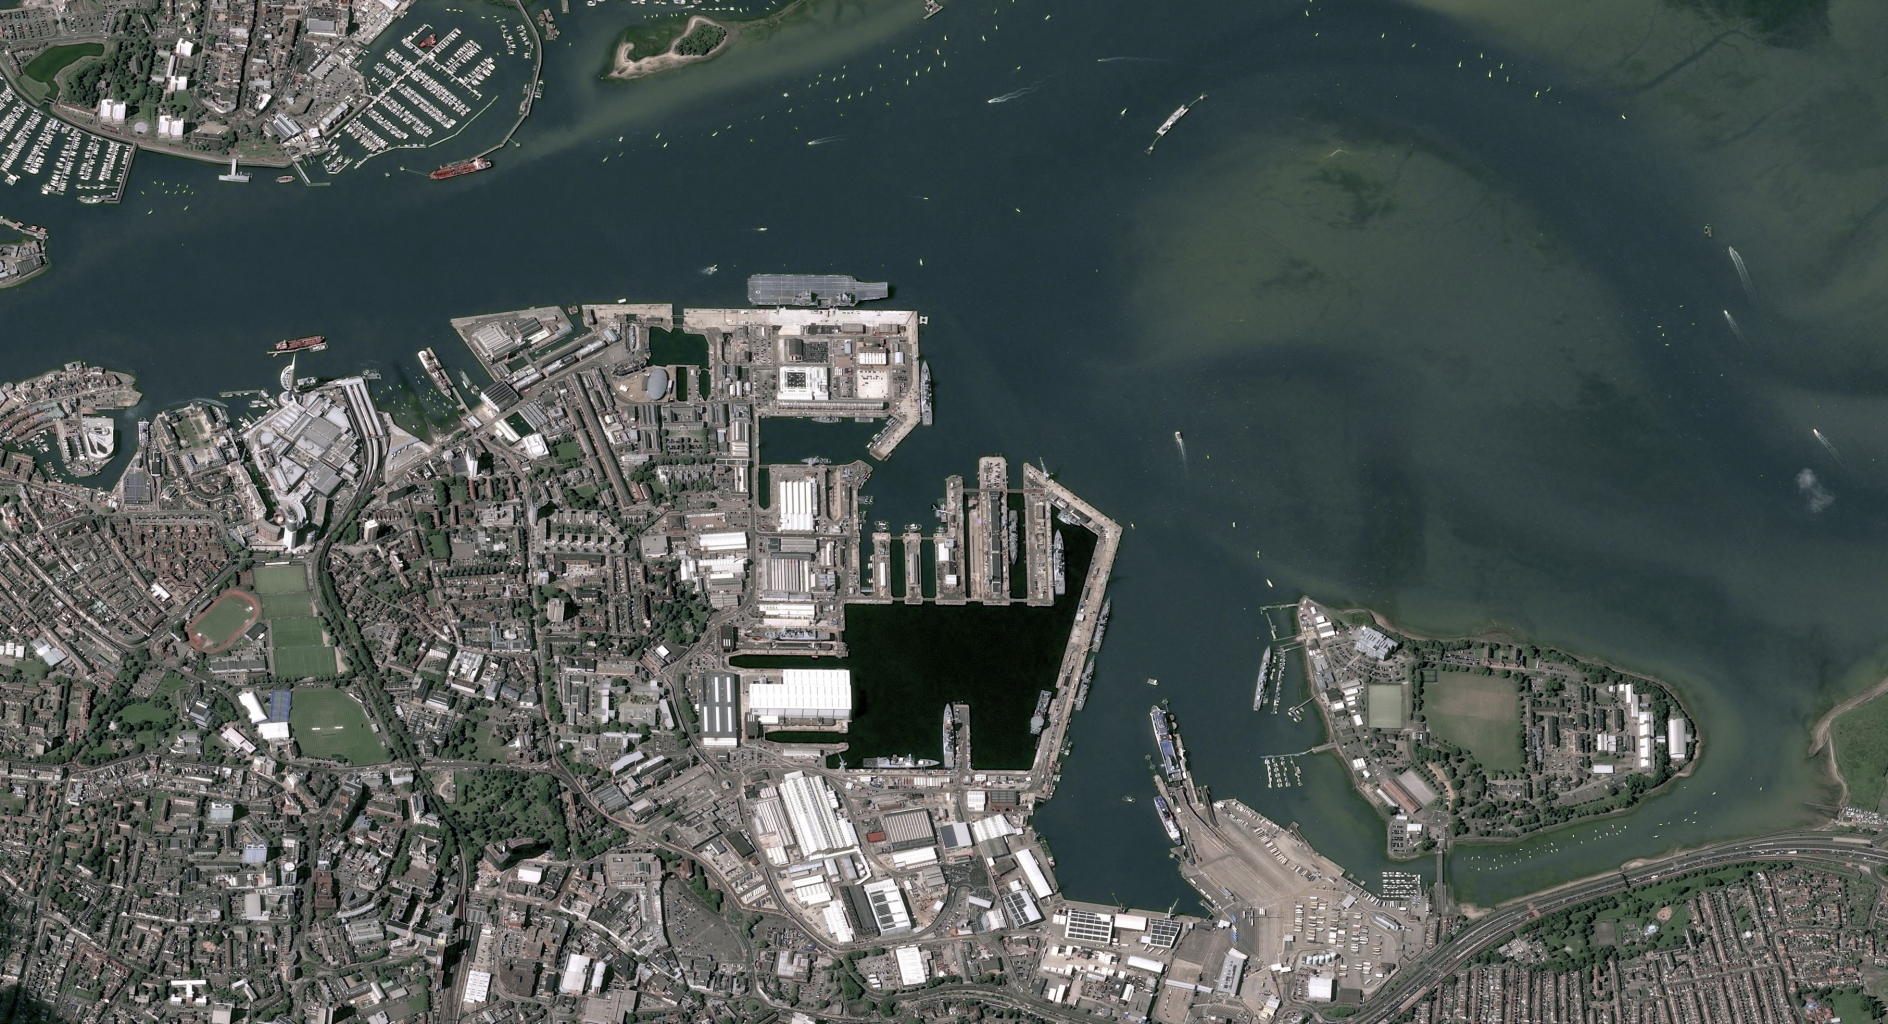 HMS Queen Elizabeth in Portsmouth, UK. Image acquired by Pléiades satellite on 18 August 2017. Picture: Airbus. Click to enlarge.